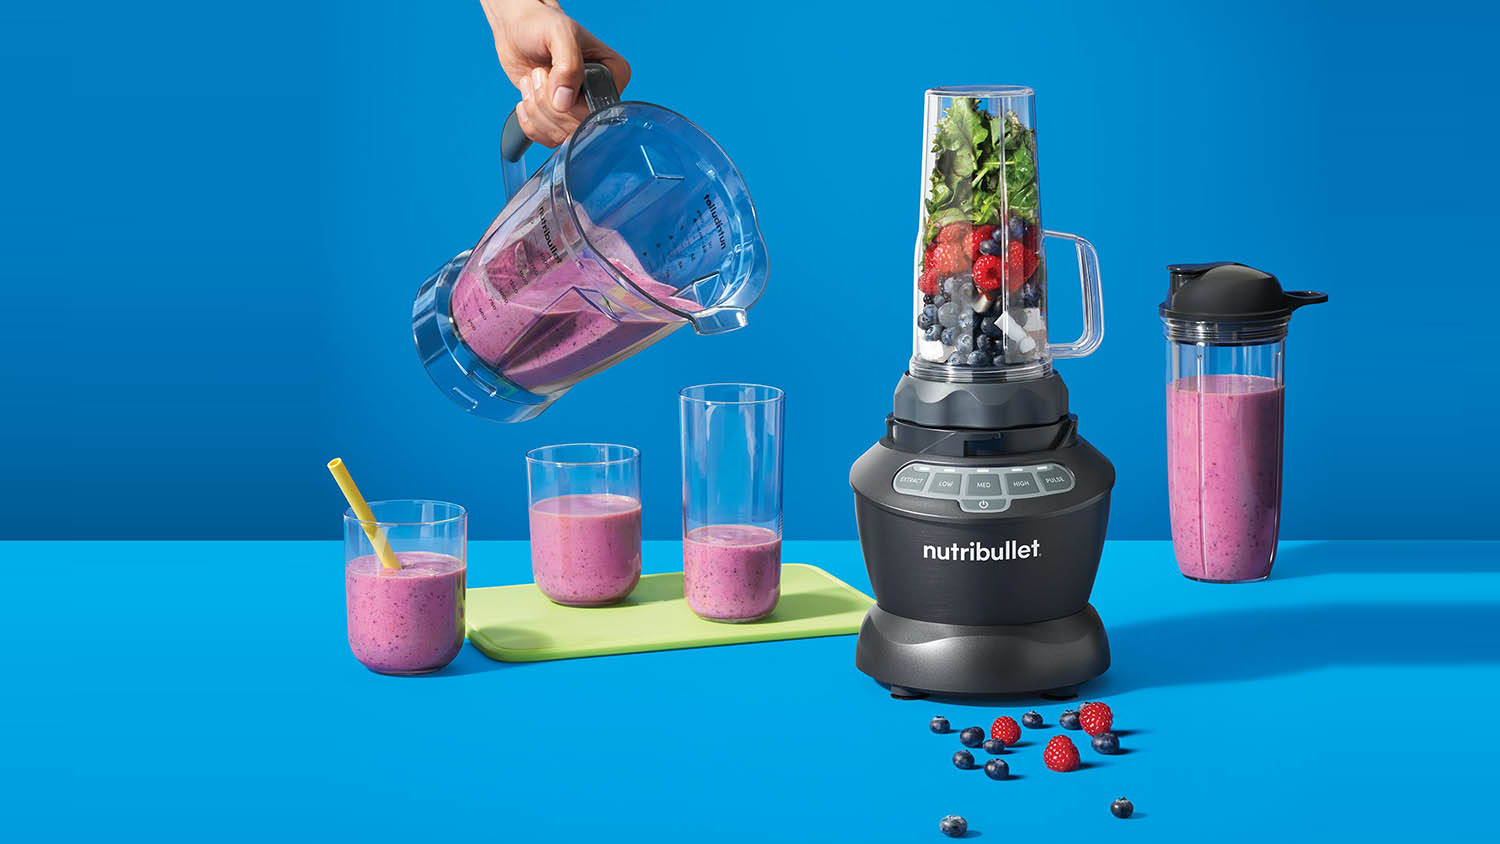 A NutriBullet Blender Is the Best Way to Make Your Favorite Smoothies